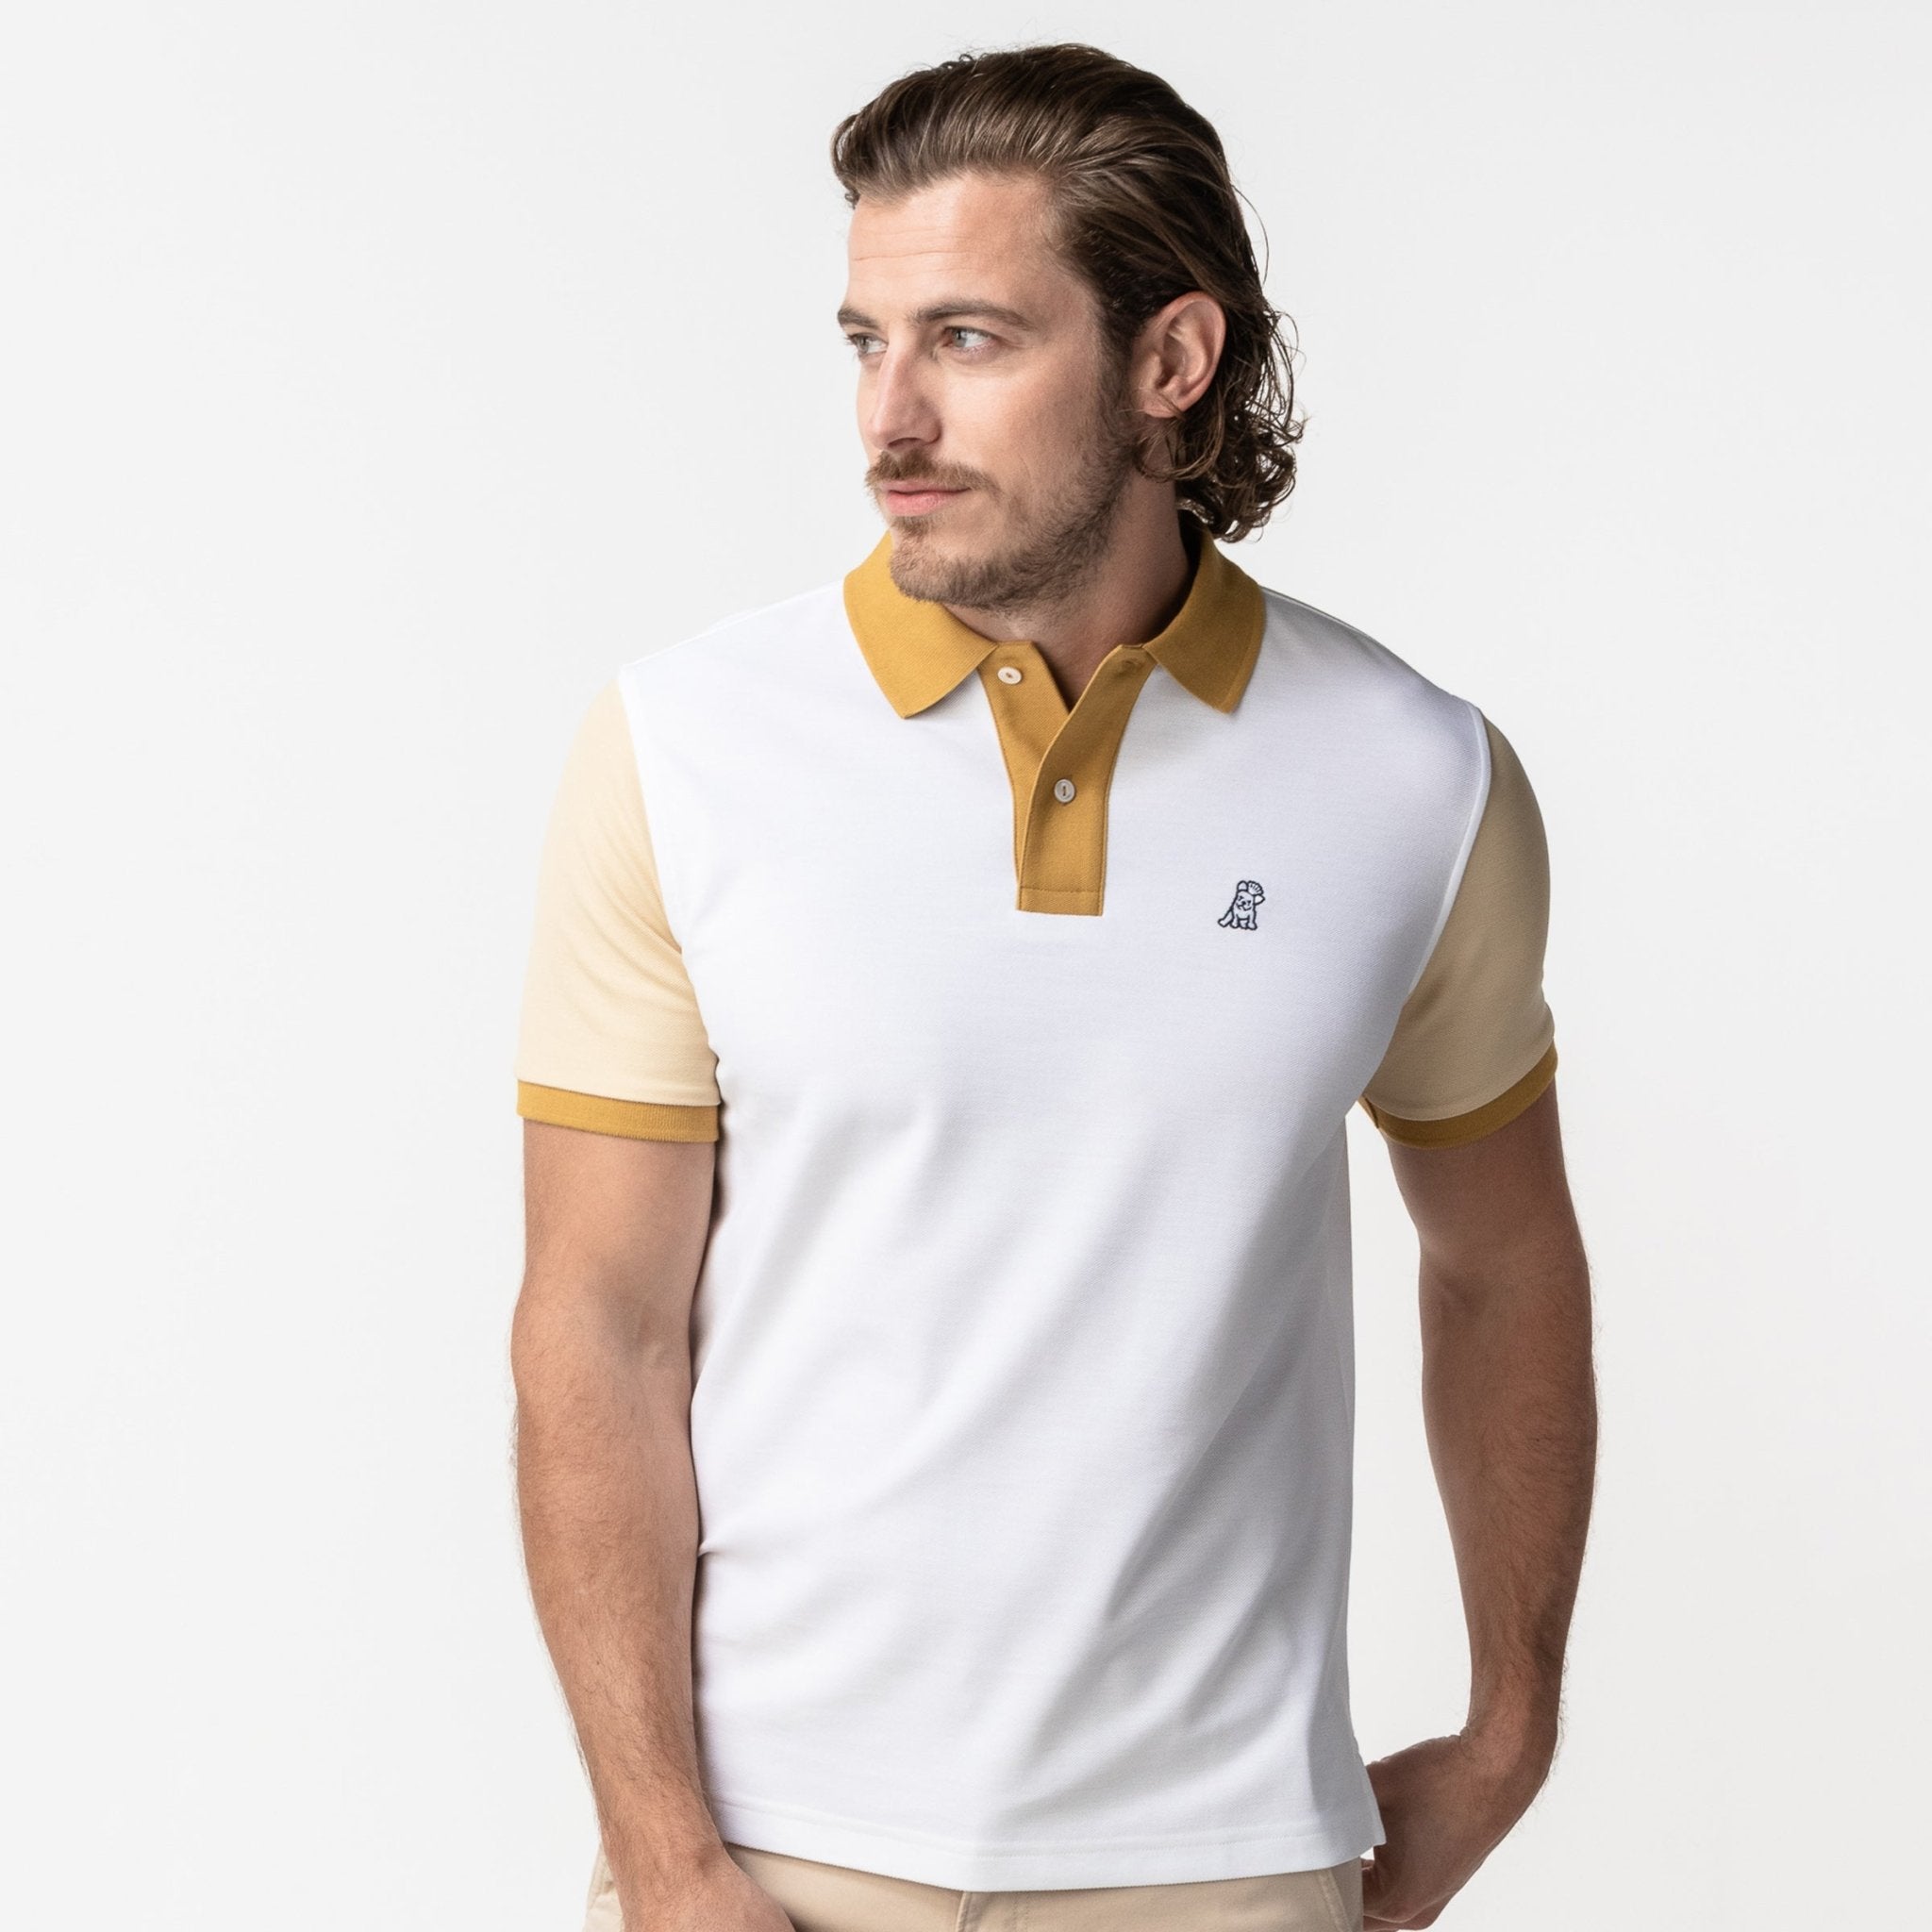 Men's Beige Sleeves and Neck Polo Shirt - JAMES BARK